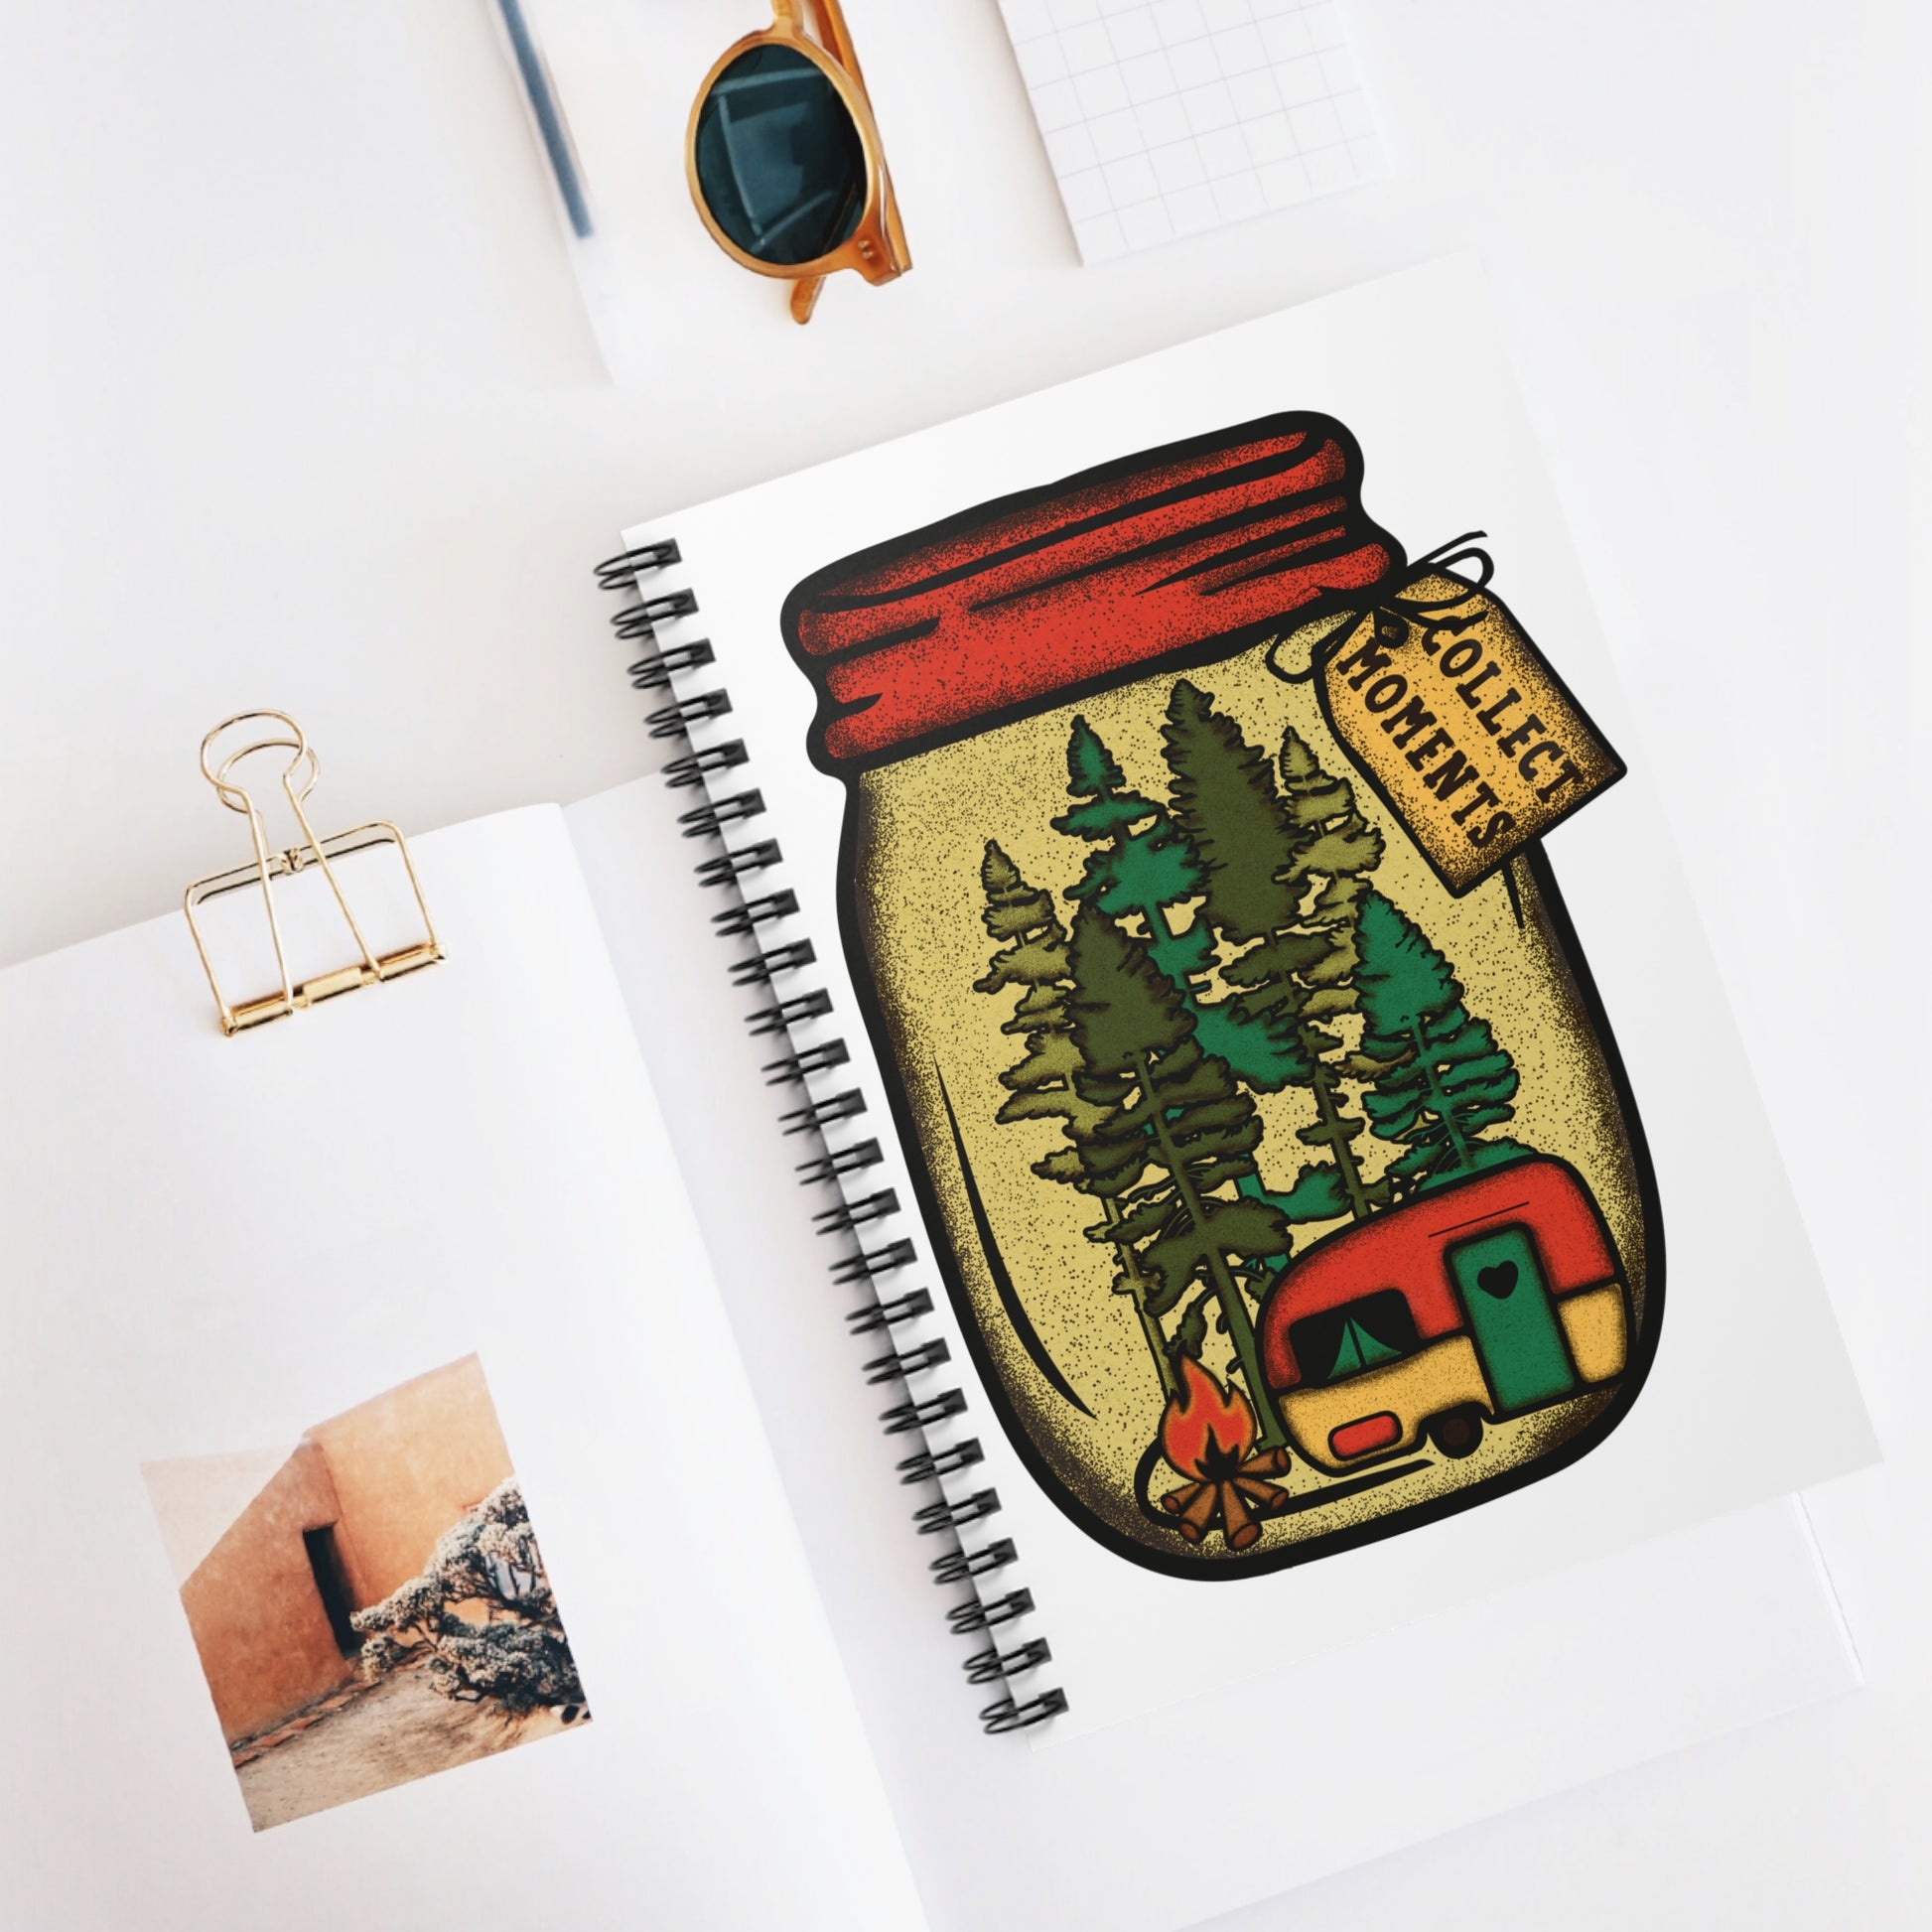 Camping Jar: Spiral Notebook - Log Books - Journals - Diaries - and More Custom Printed by TheGlassyLass